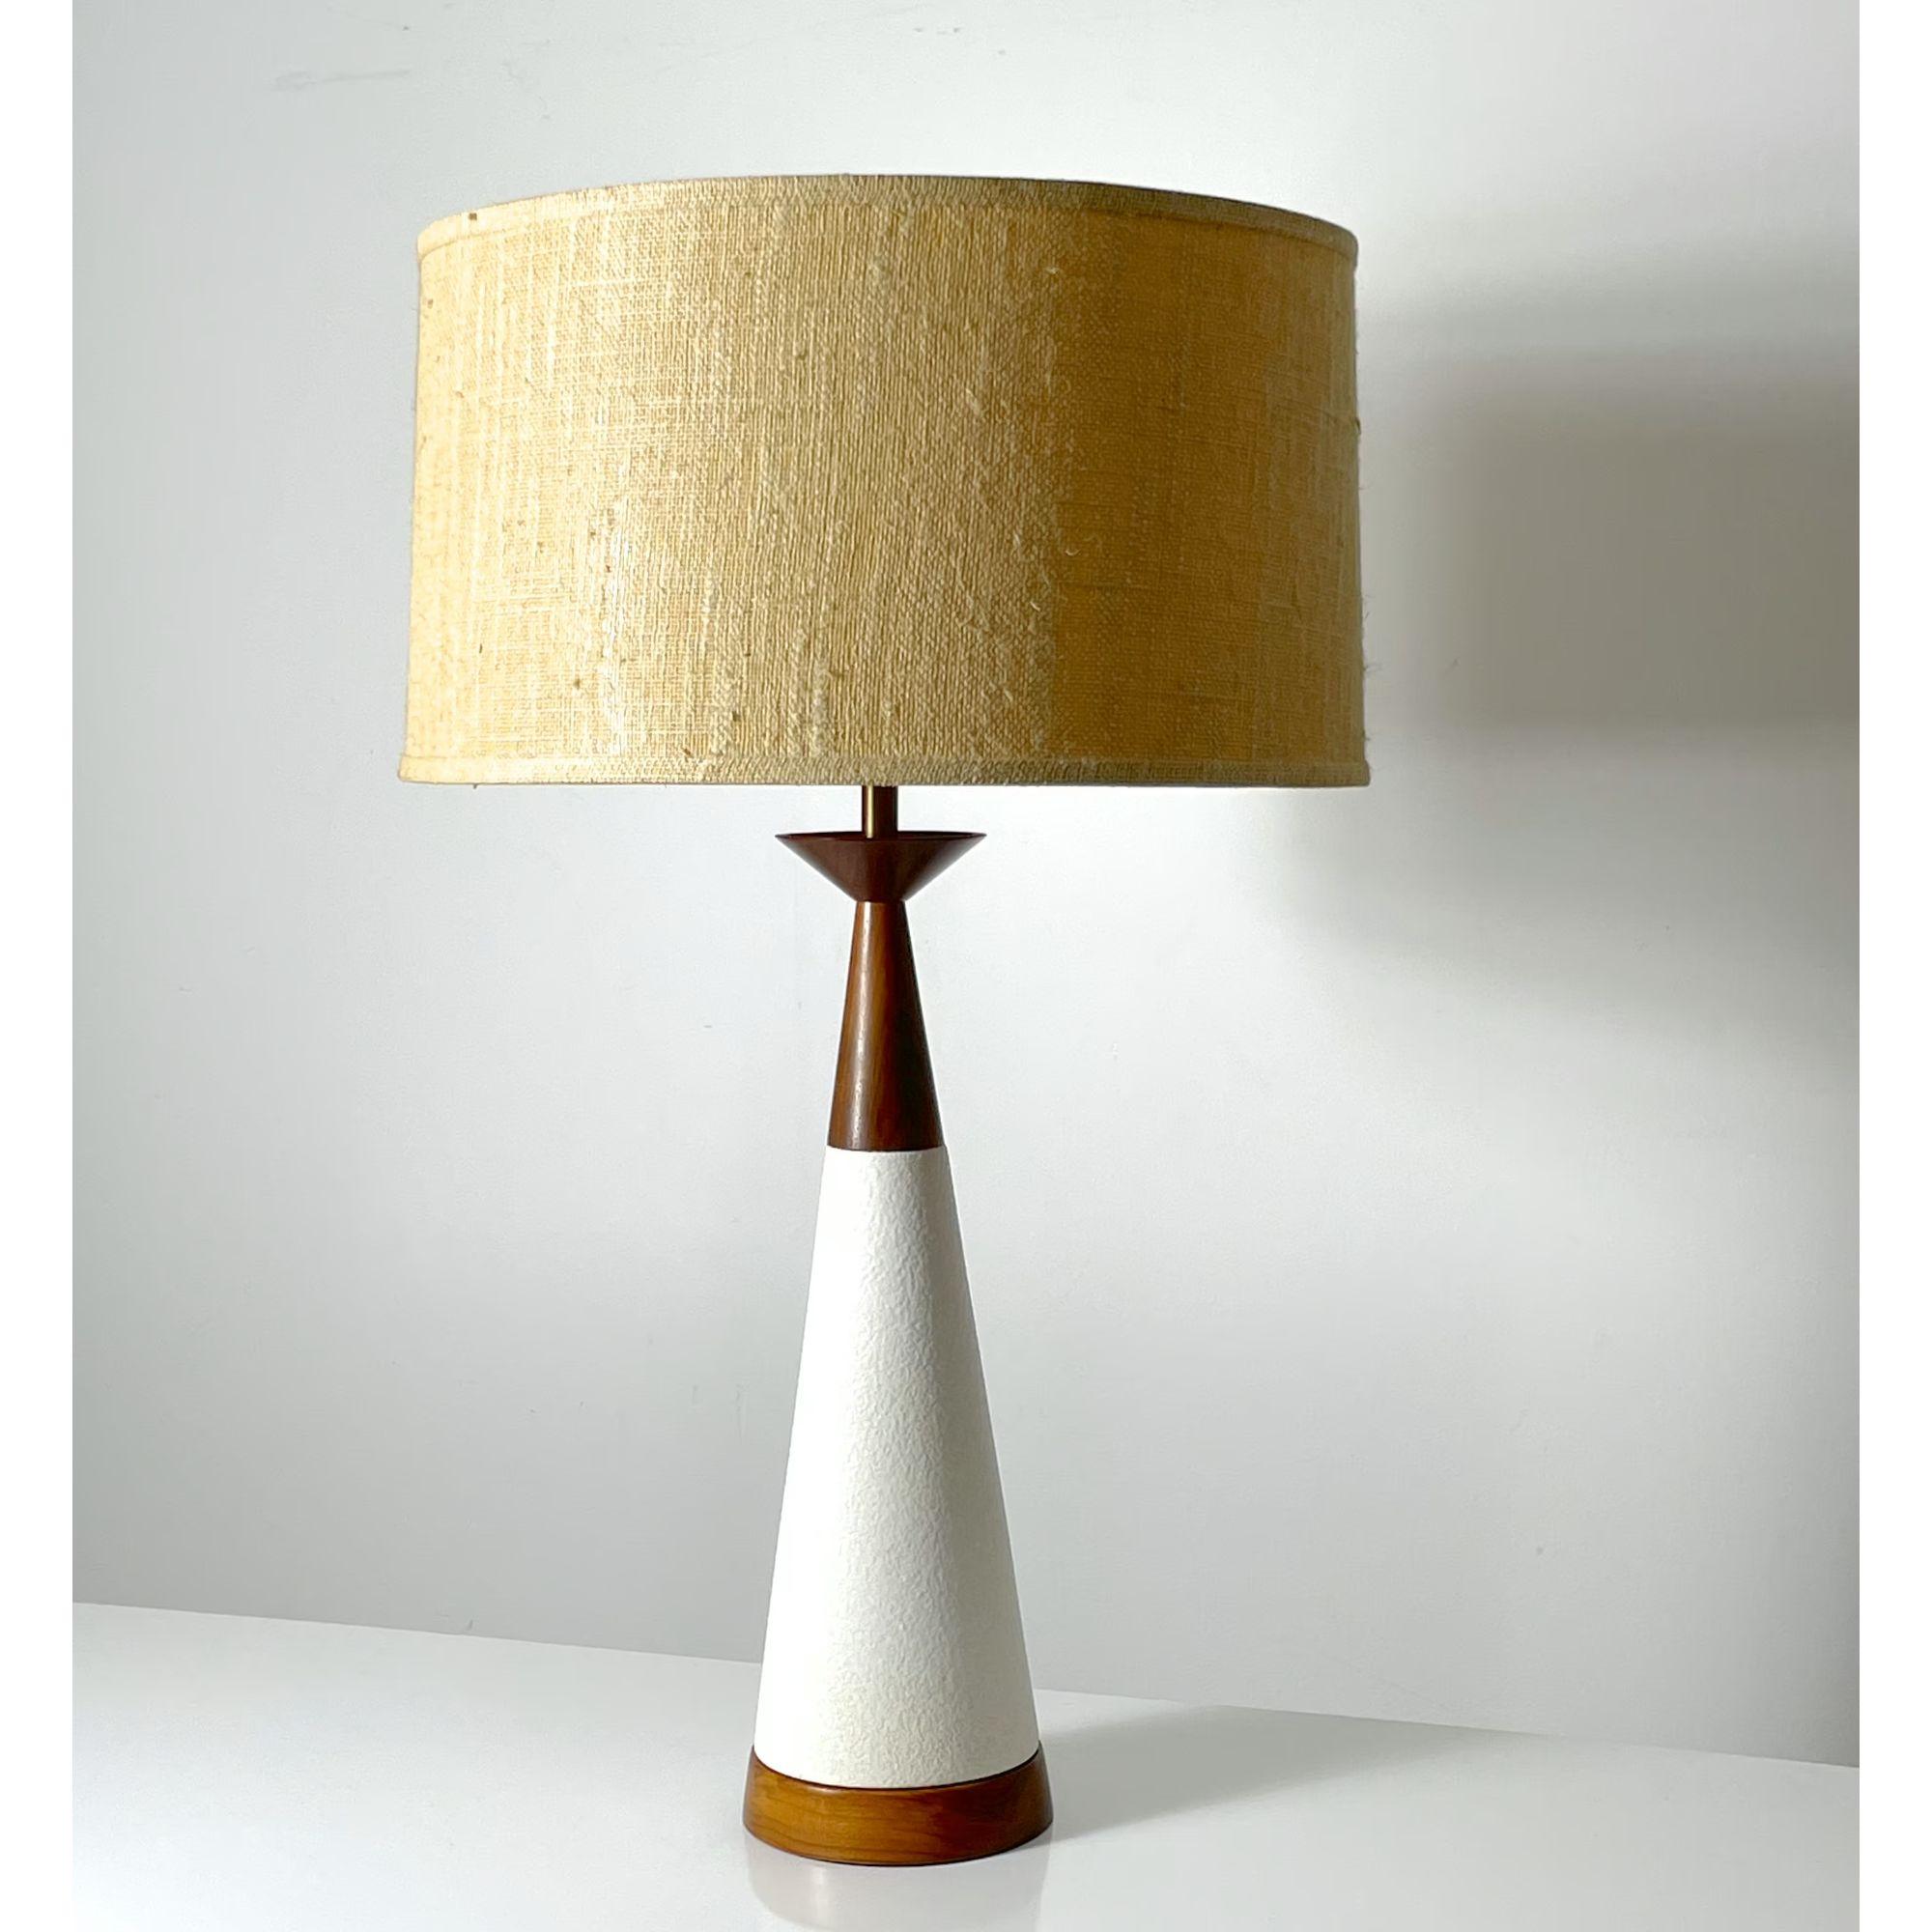 Vintage Mid Century Modern White Ceramic Cone Table Lamp 1960s

Stunning modernist table lamp circa 1950s
White ceramic conical form base with sculpted walnut hourglass detail
Complete with original woven shade
Attributed to Michael Lax for Hyalyn /